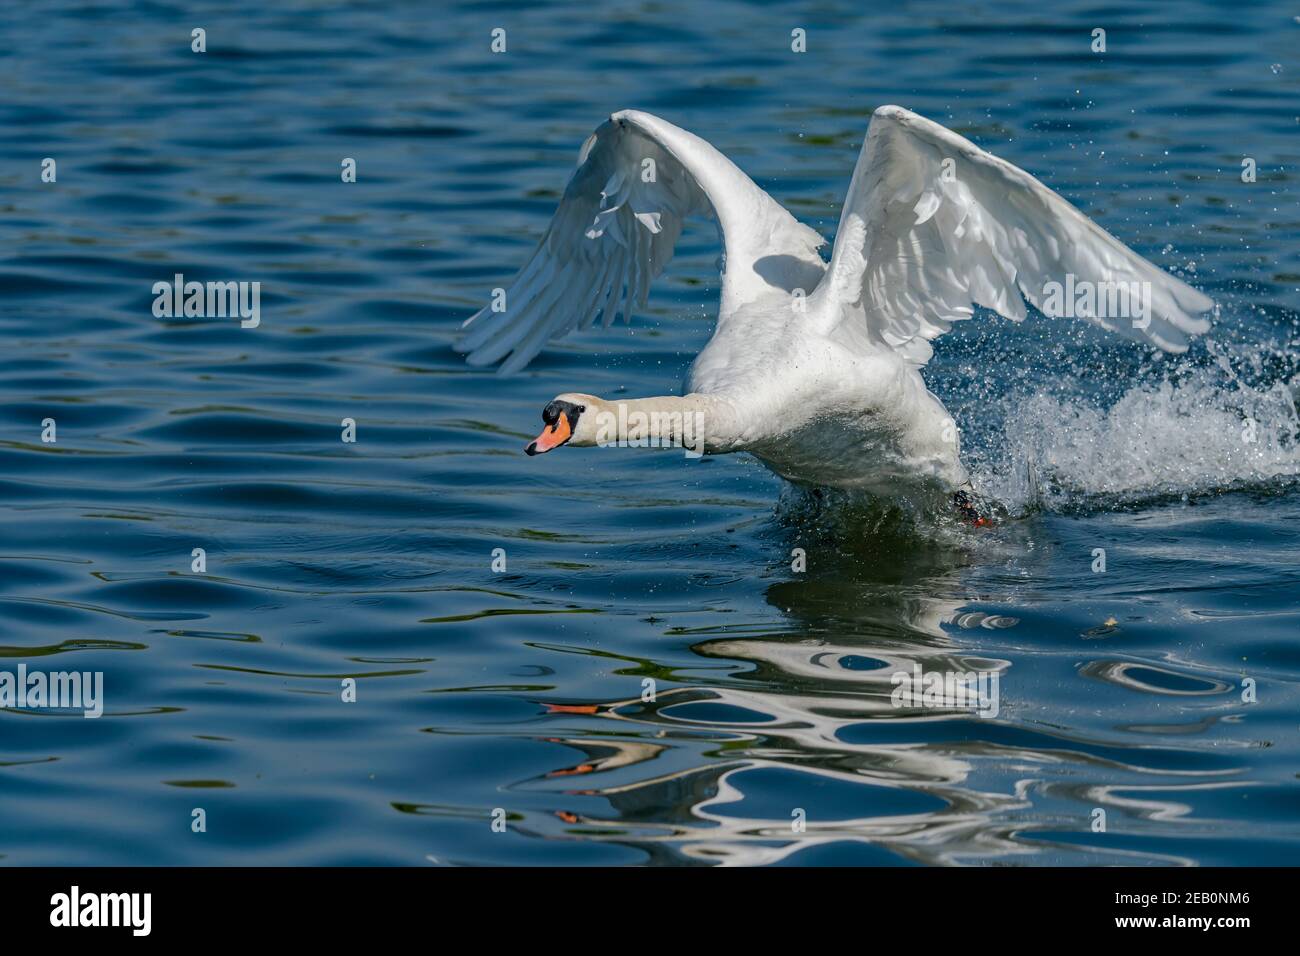 Swan Taking off on a lake Stock Photo